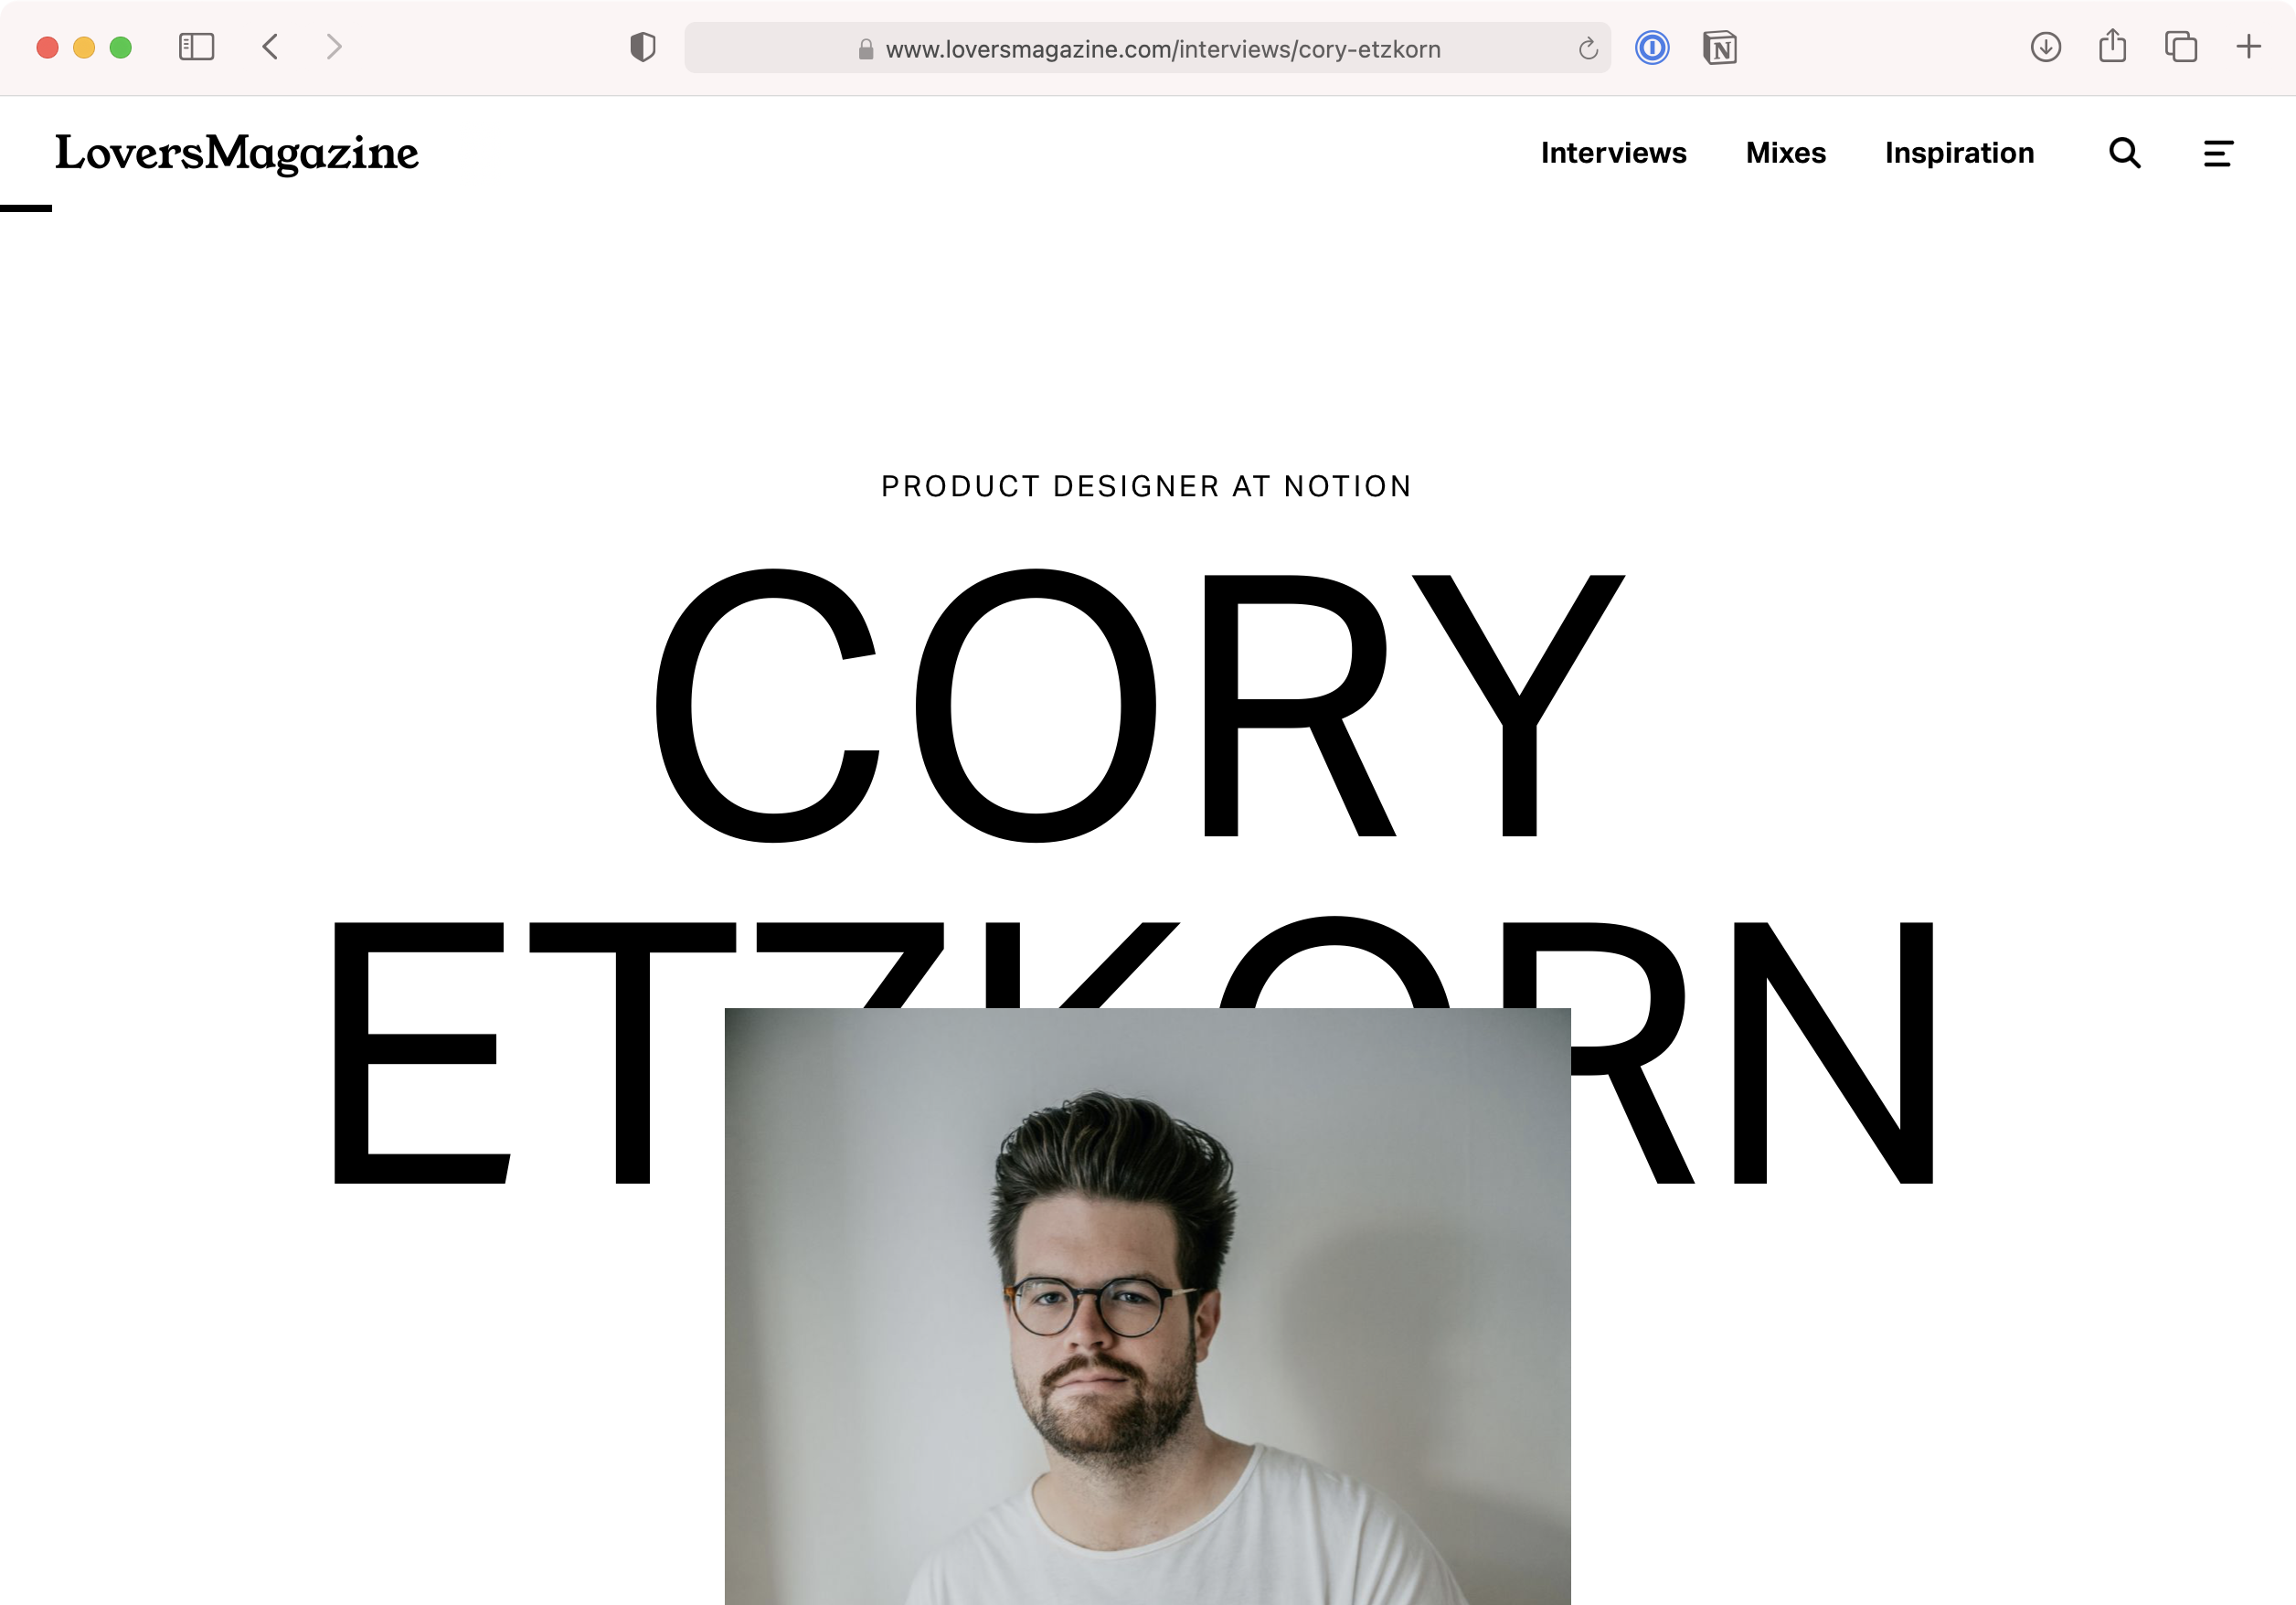 Cory Etzkorn featured in Lovers Magazine